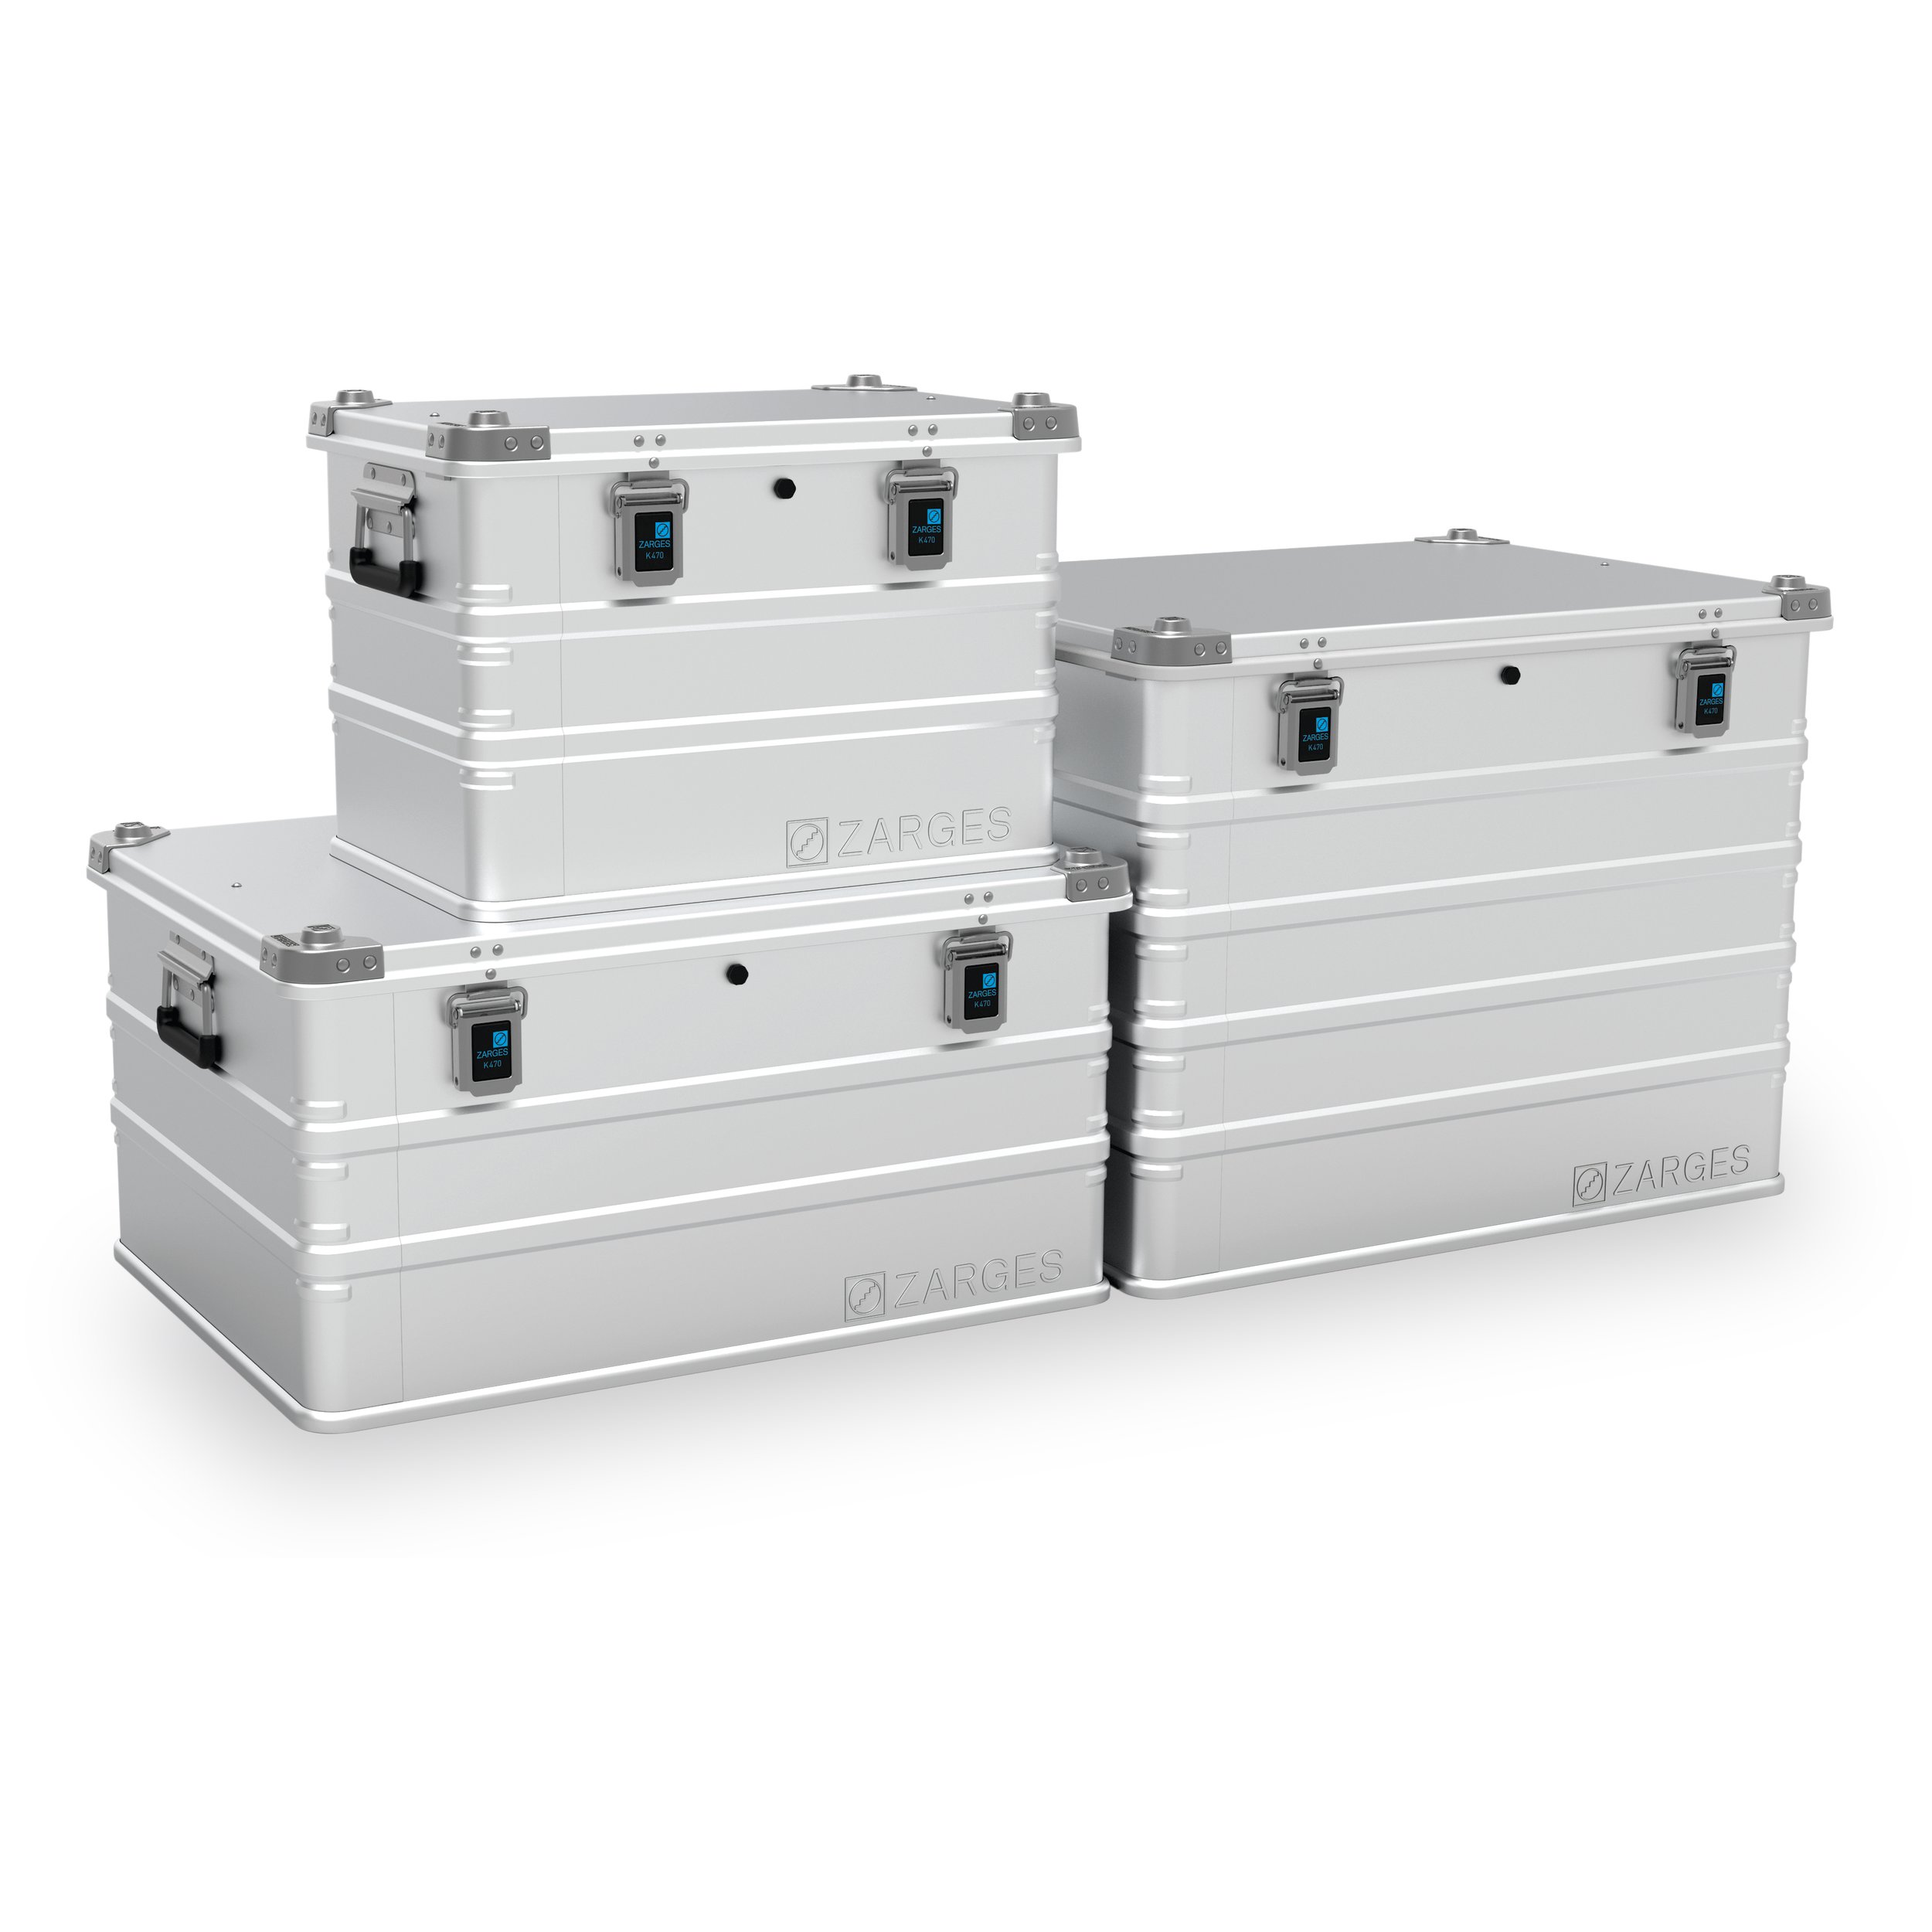 Boxes | ZARGES - Innovations in aluminium